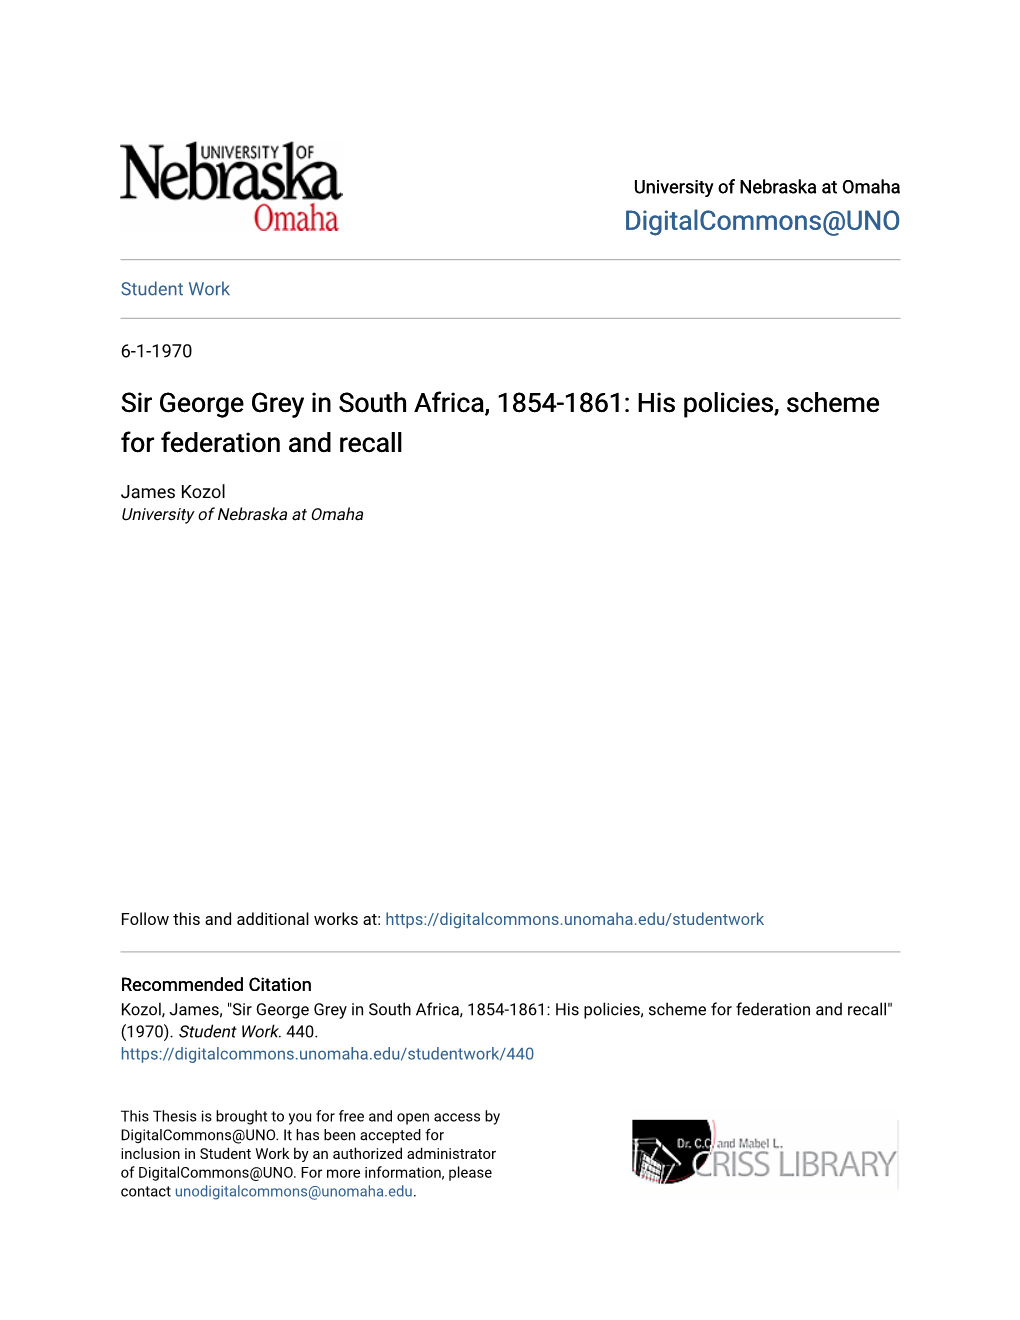 Sir George Grey in South Africa, 1854-1861: His Policies, Scheme for Federation and Recall